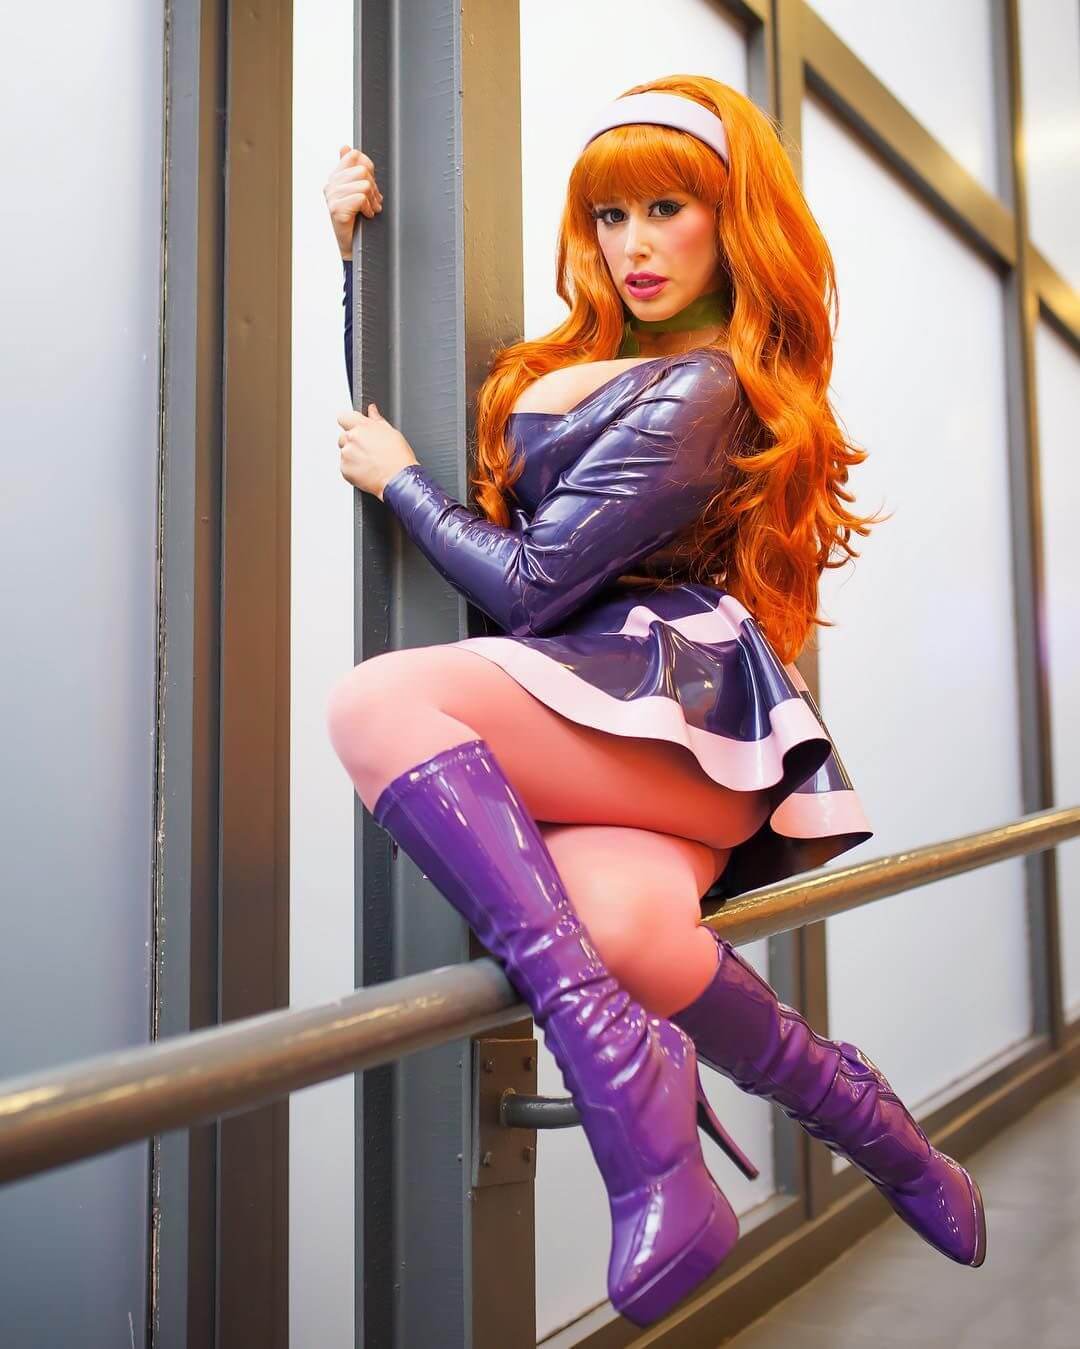 70+ Hot Pictures Of Daphne Blake From Scooby Doo Which Are S